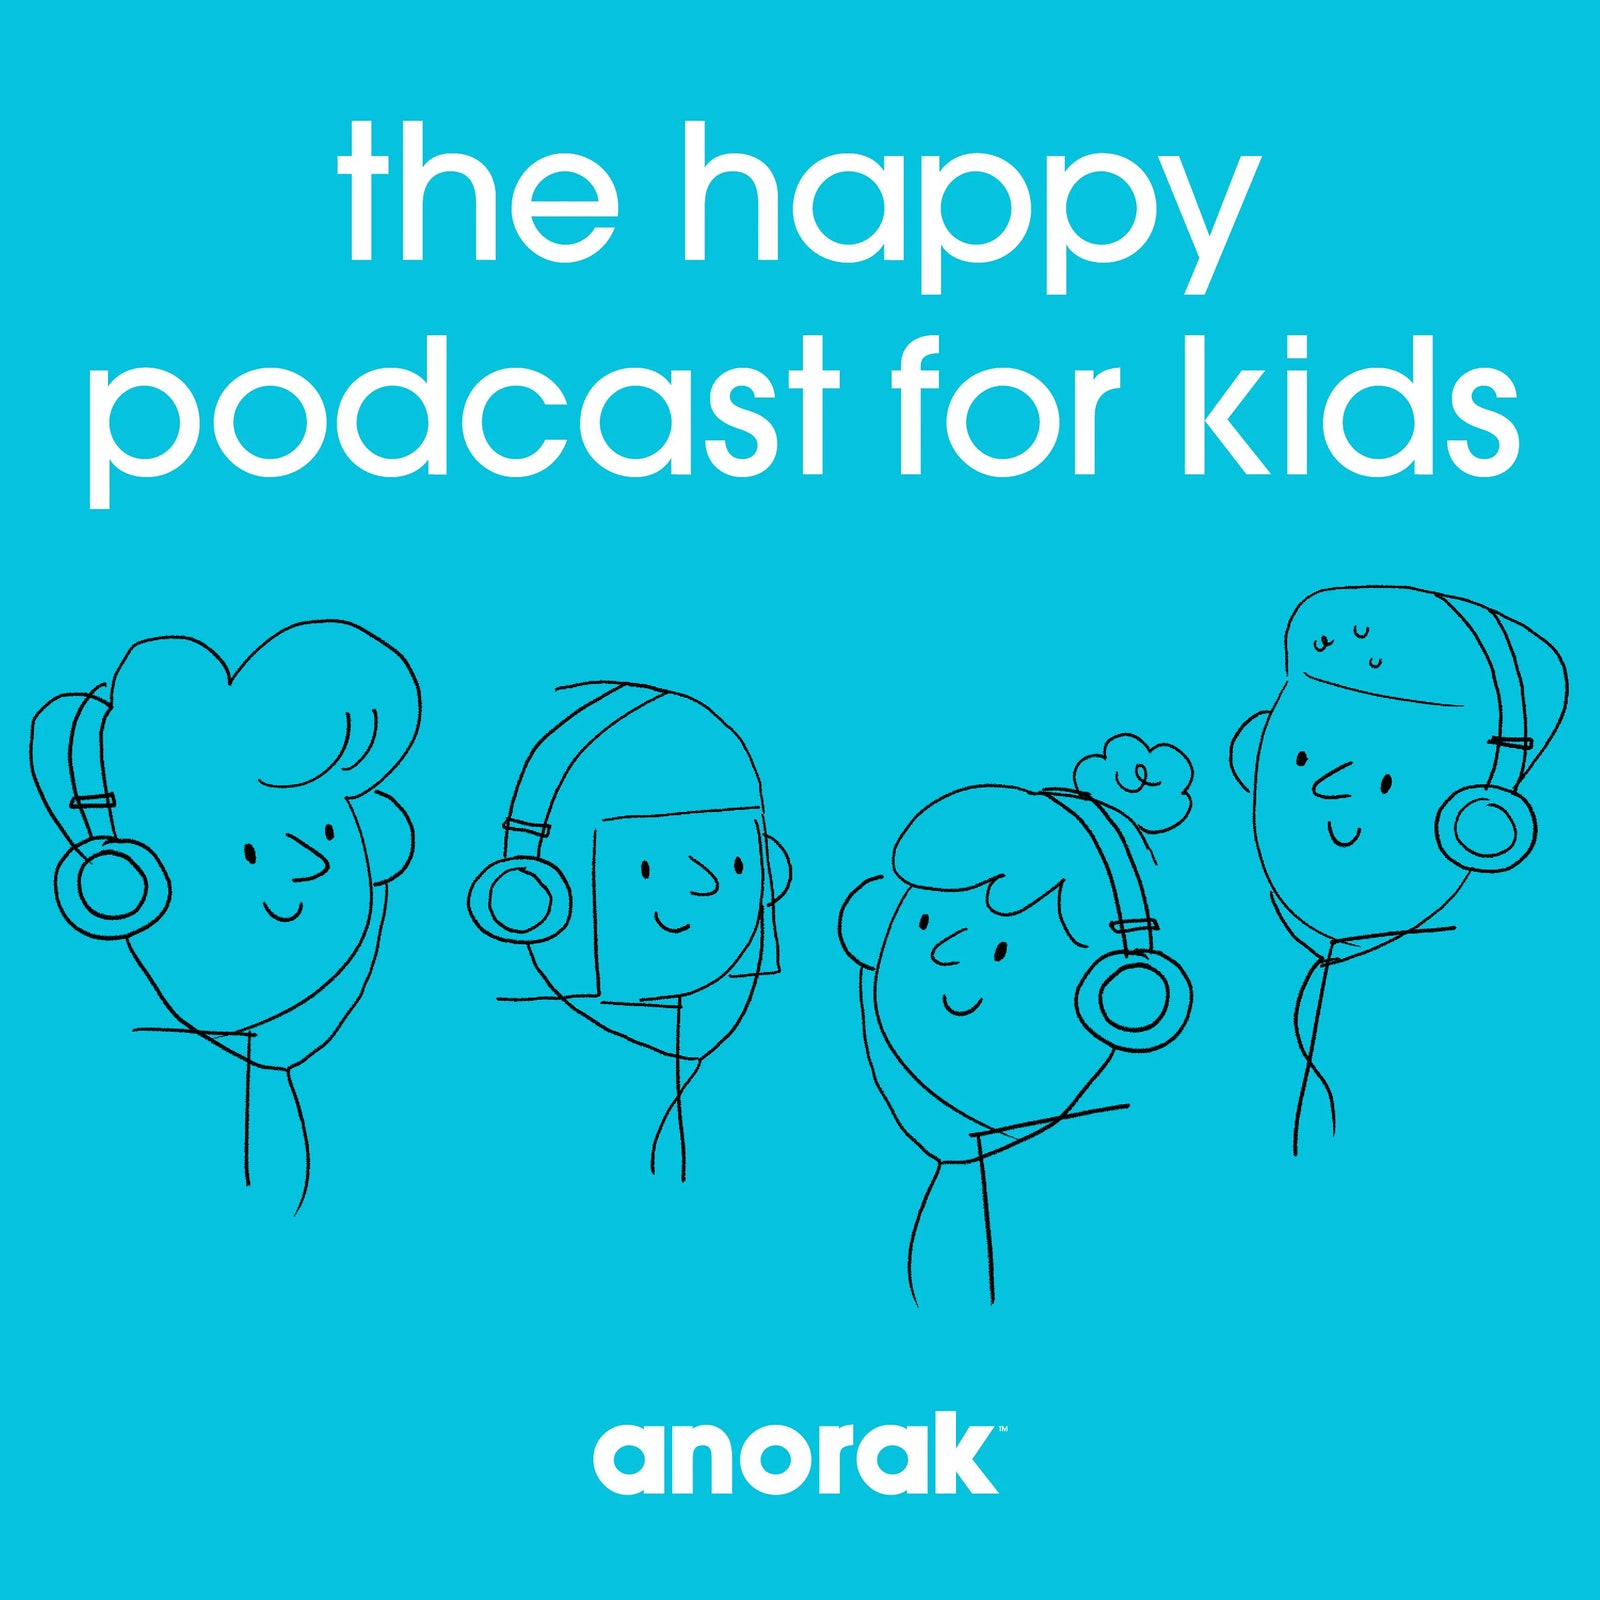 Cover of 'The Happy Podcast for Kids' with doodles of kids wearing headphones